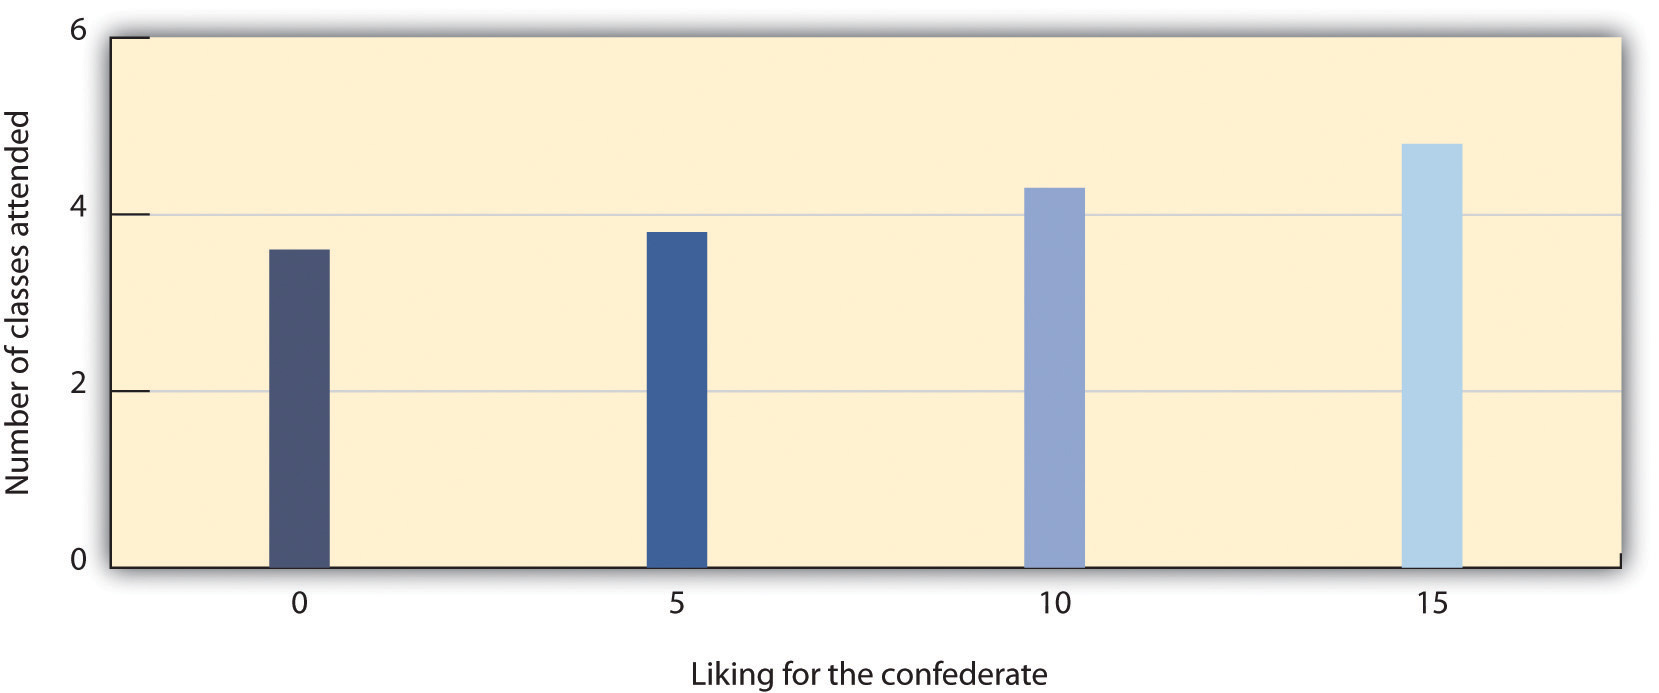 Richard Moreland and Scott Beach (1992) had female confederates visit classrooms 0, 5, 10, or 15 times over the course of a semester. Then the students rated their liking of the confederates. As predicted by the principles of mere exposure, confederates who had attended class more often were also liked more.